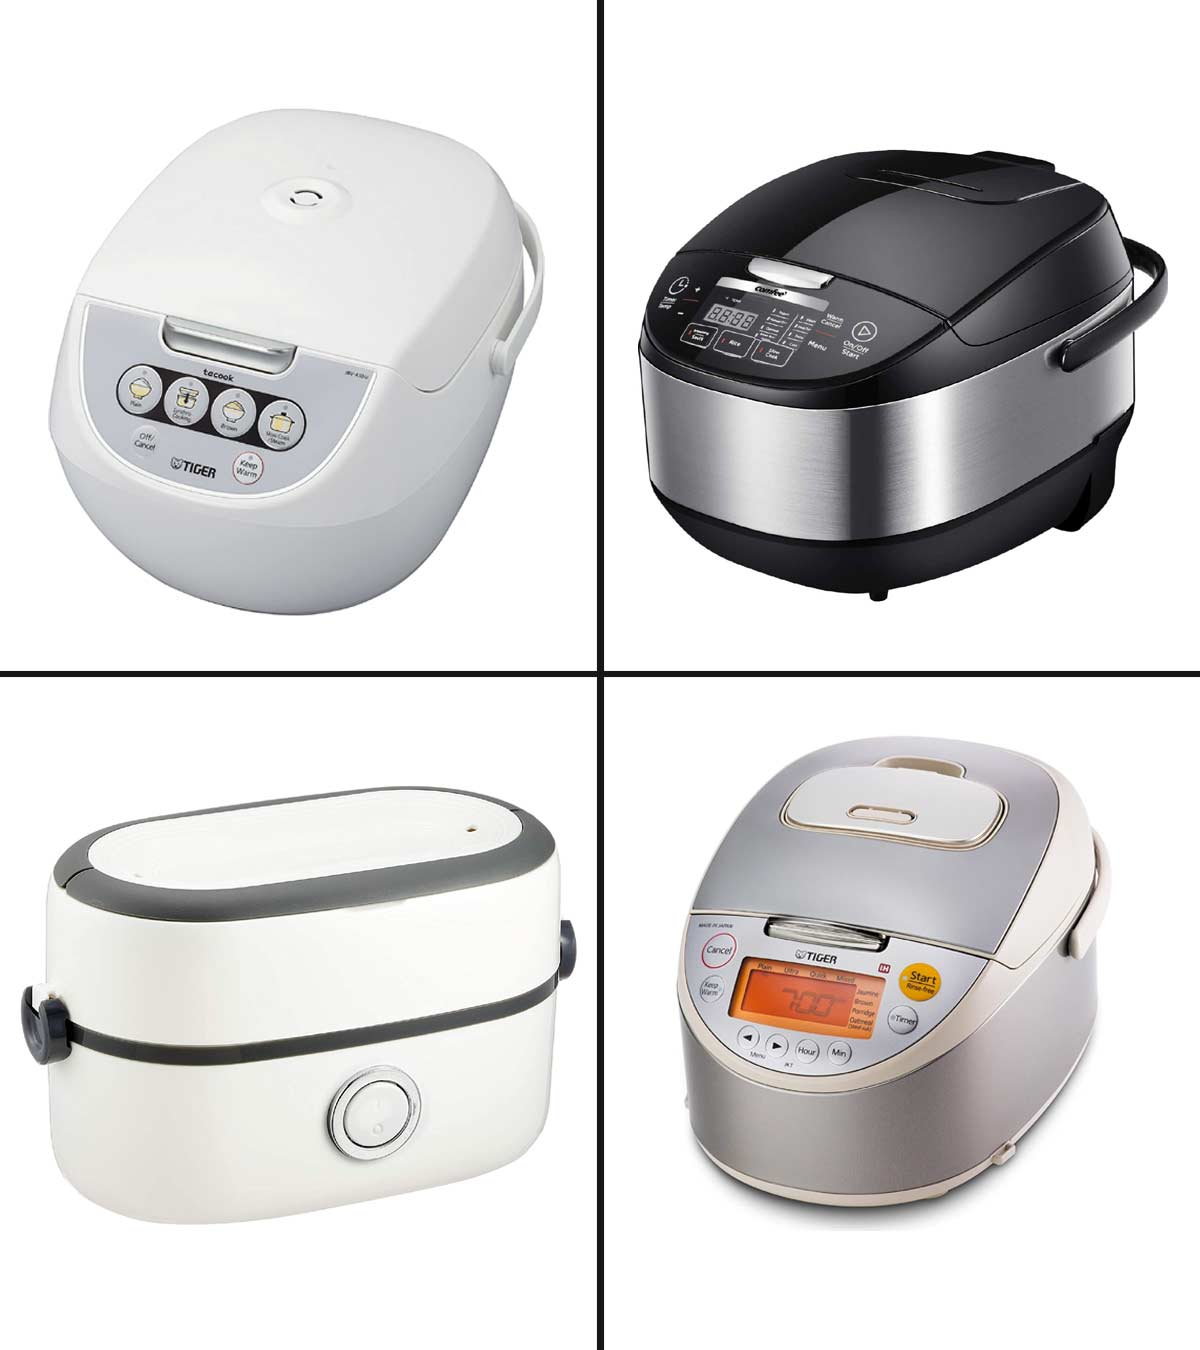 https://www.momjunction.com/wp-content/uploads/2020/10/11-Best-Japanese-Rice-Cookers-To-Buy-In-2020.jpg